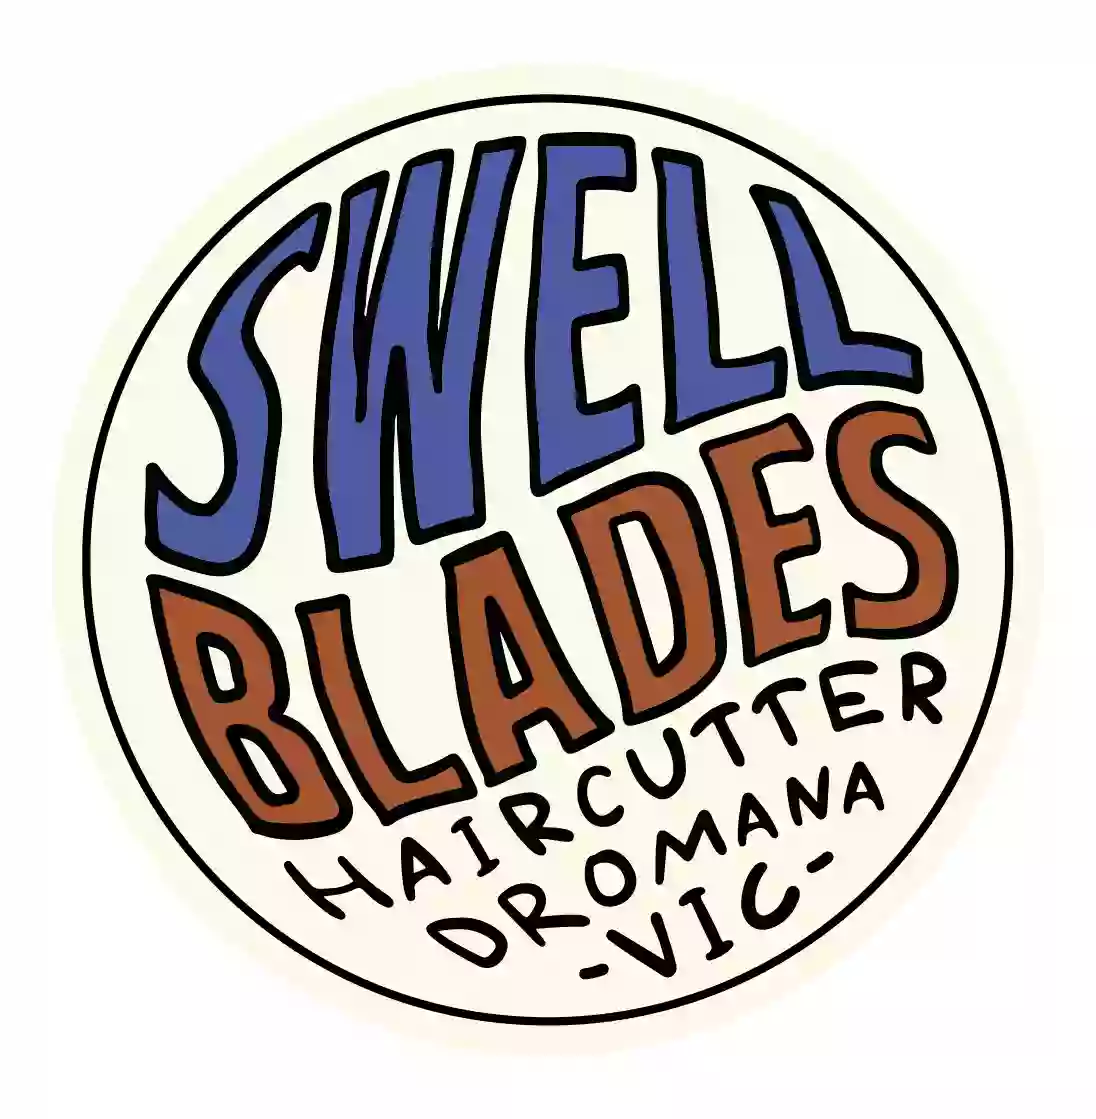 Swell Blades